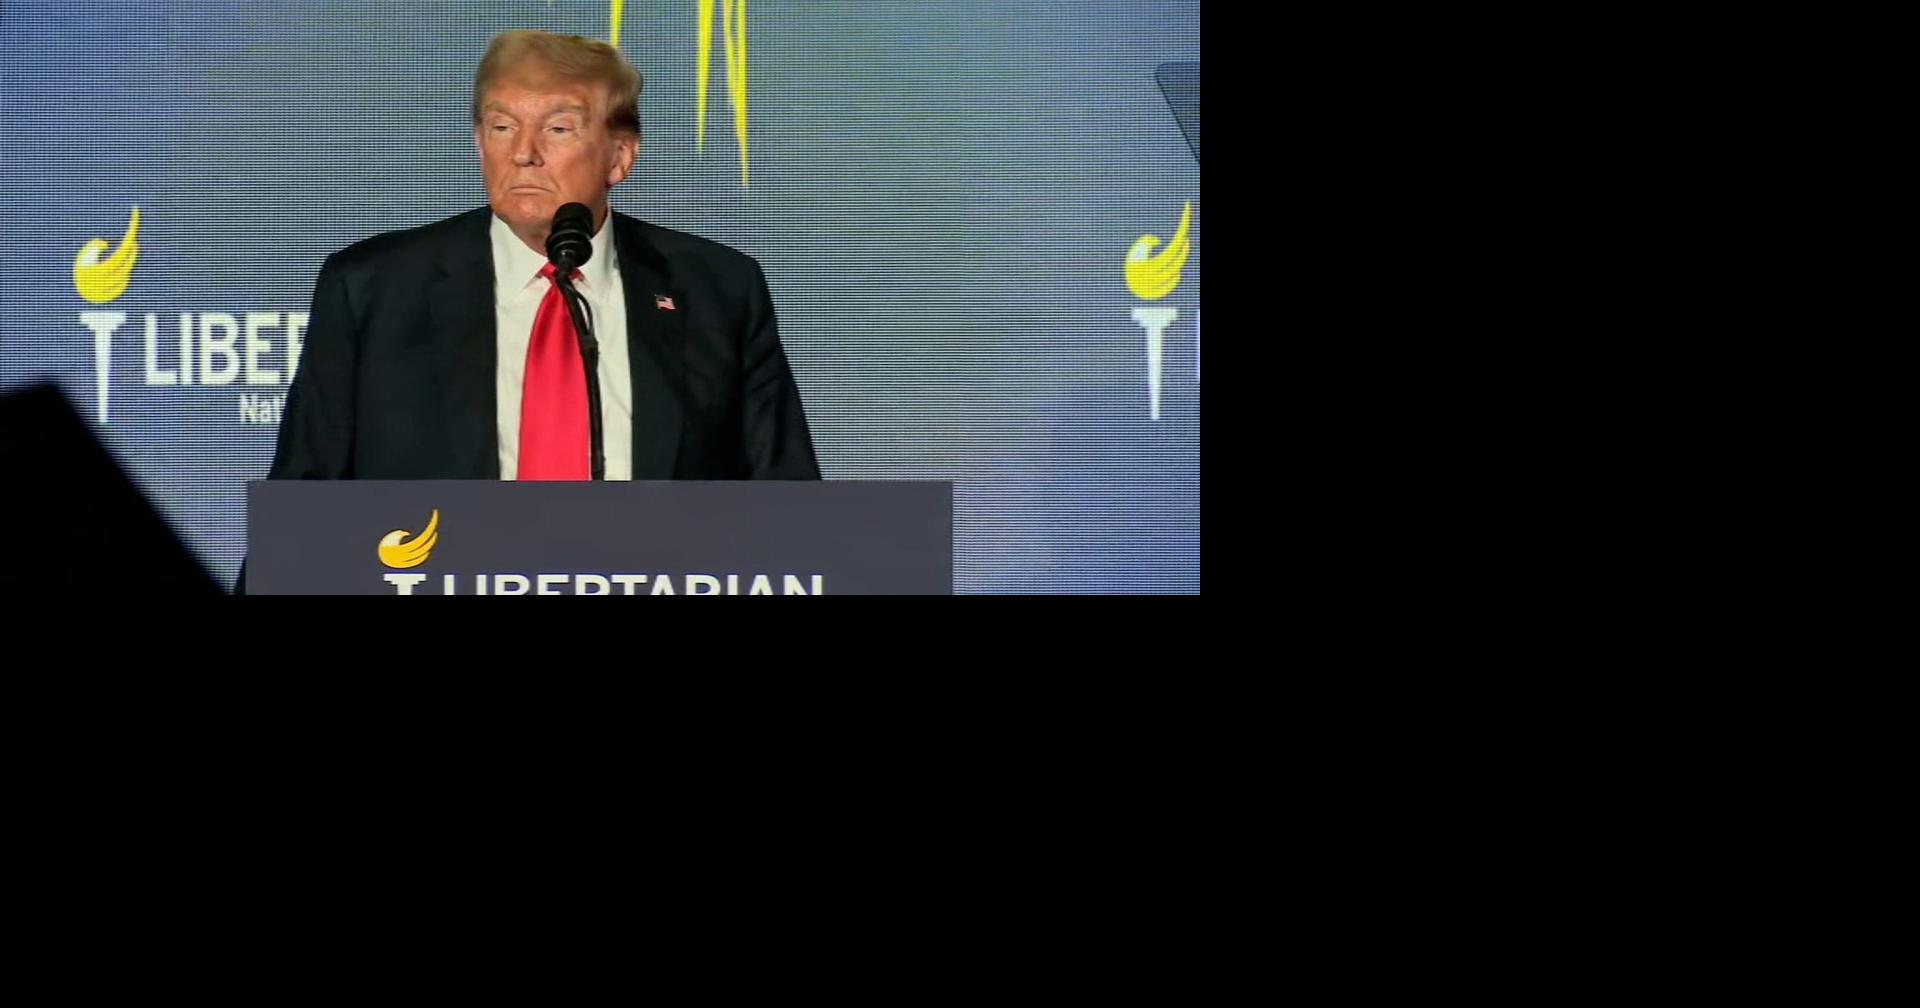 Trump loudly booed at Libertarian convention when he asks attendees to